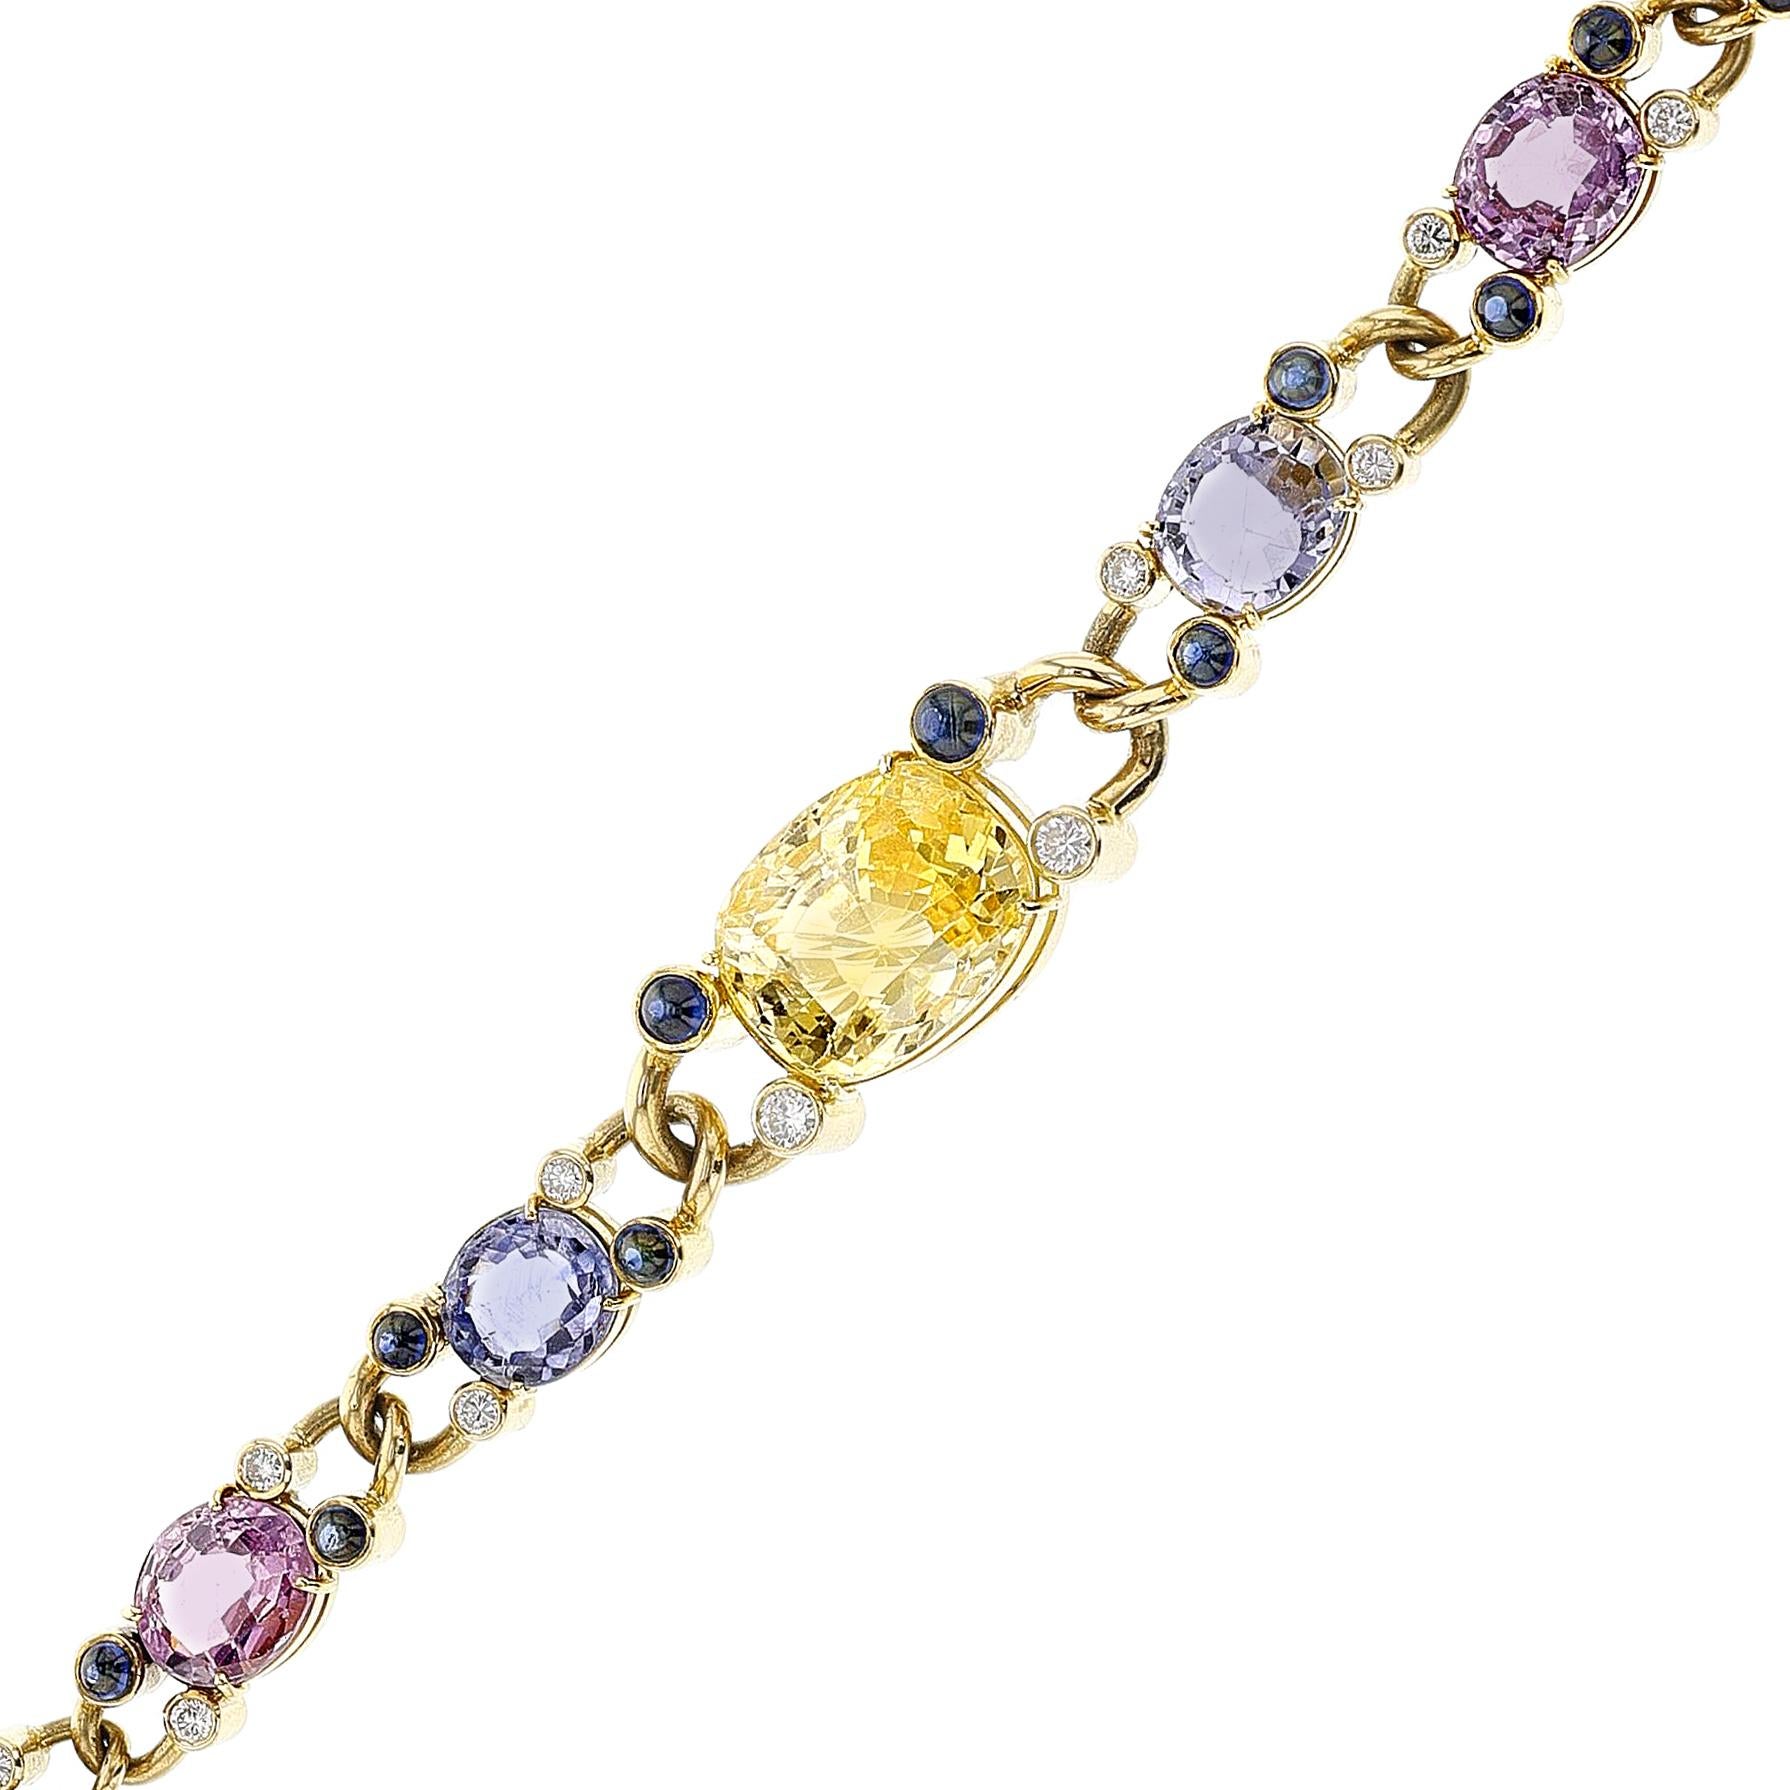 Multi-Color Sapphire Cut Stones and Cabochon with Diamond Bracelet by Deaken & F In Excellent Condition For Sale In New York, NY